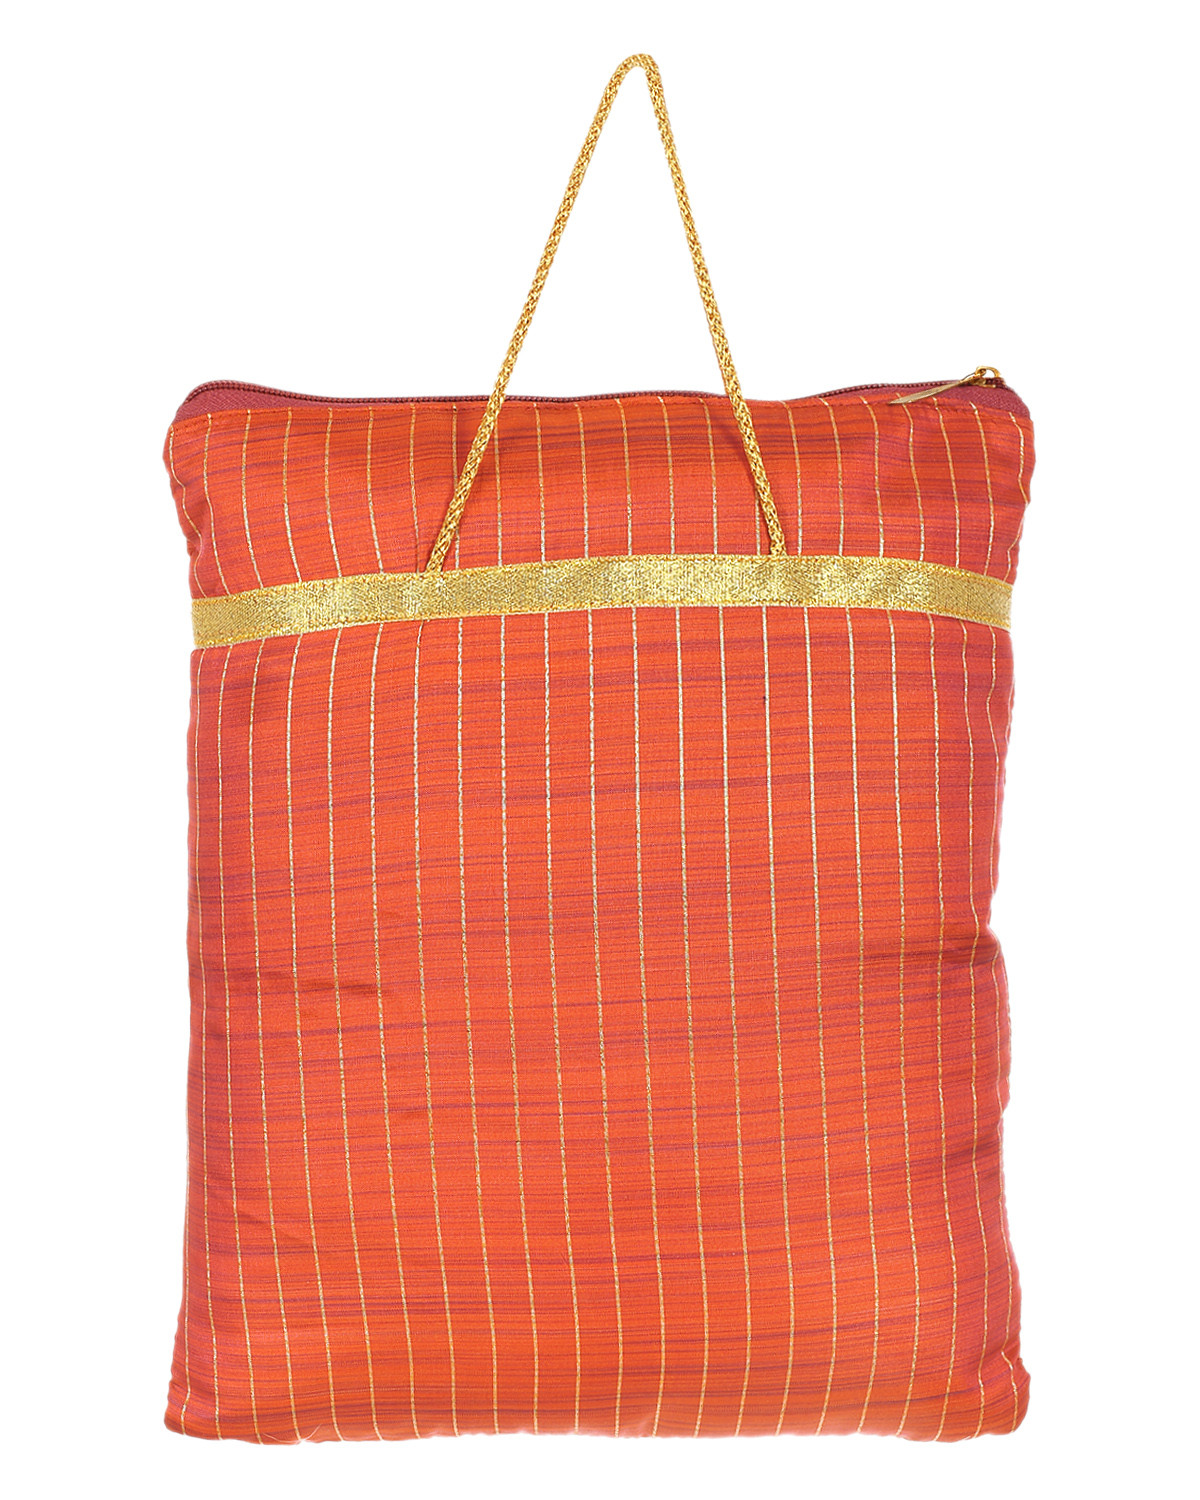 Kuber Industries Polyester Strips Print Hand Bag/Grocery Bag For Women/Girls With Handle (Red) 54KM4040